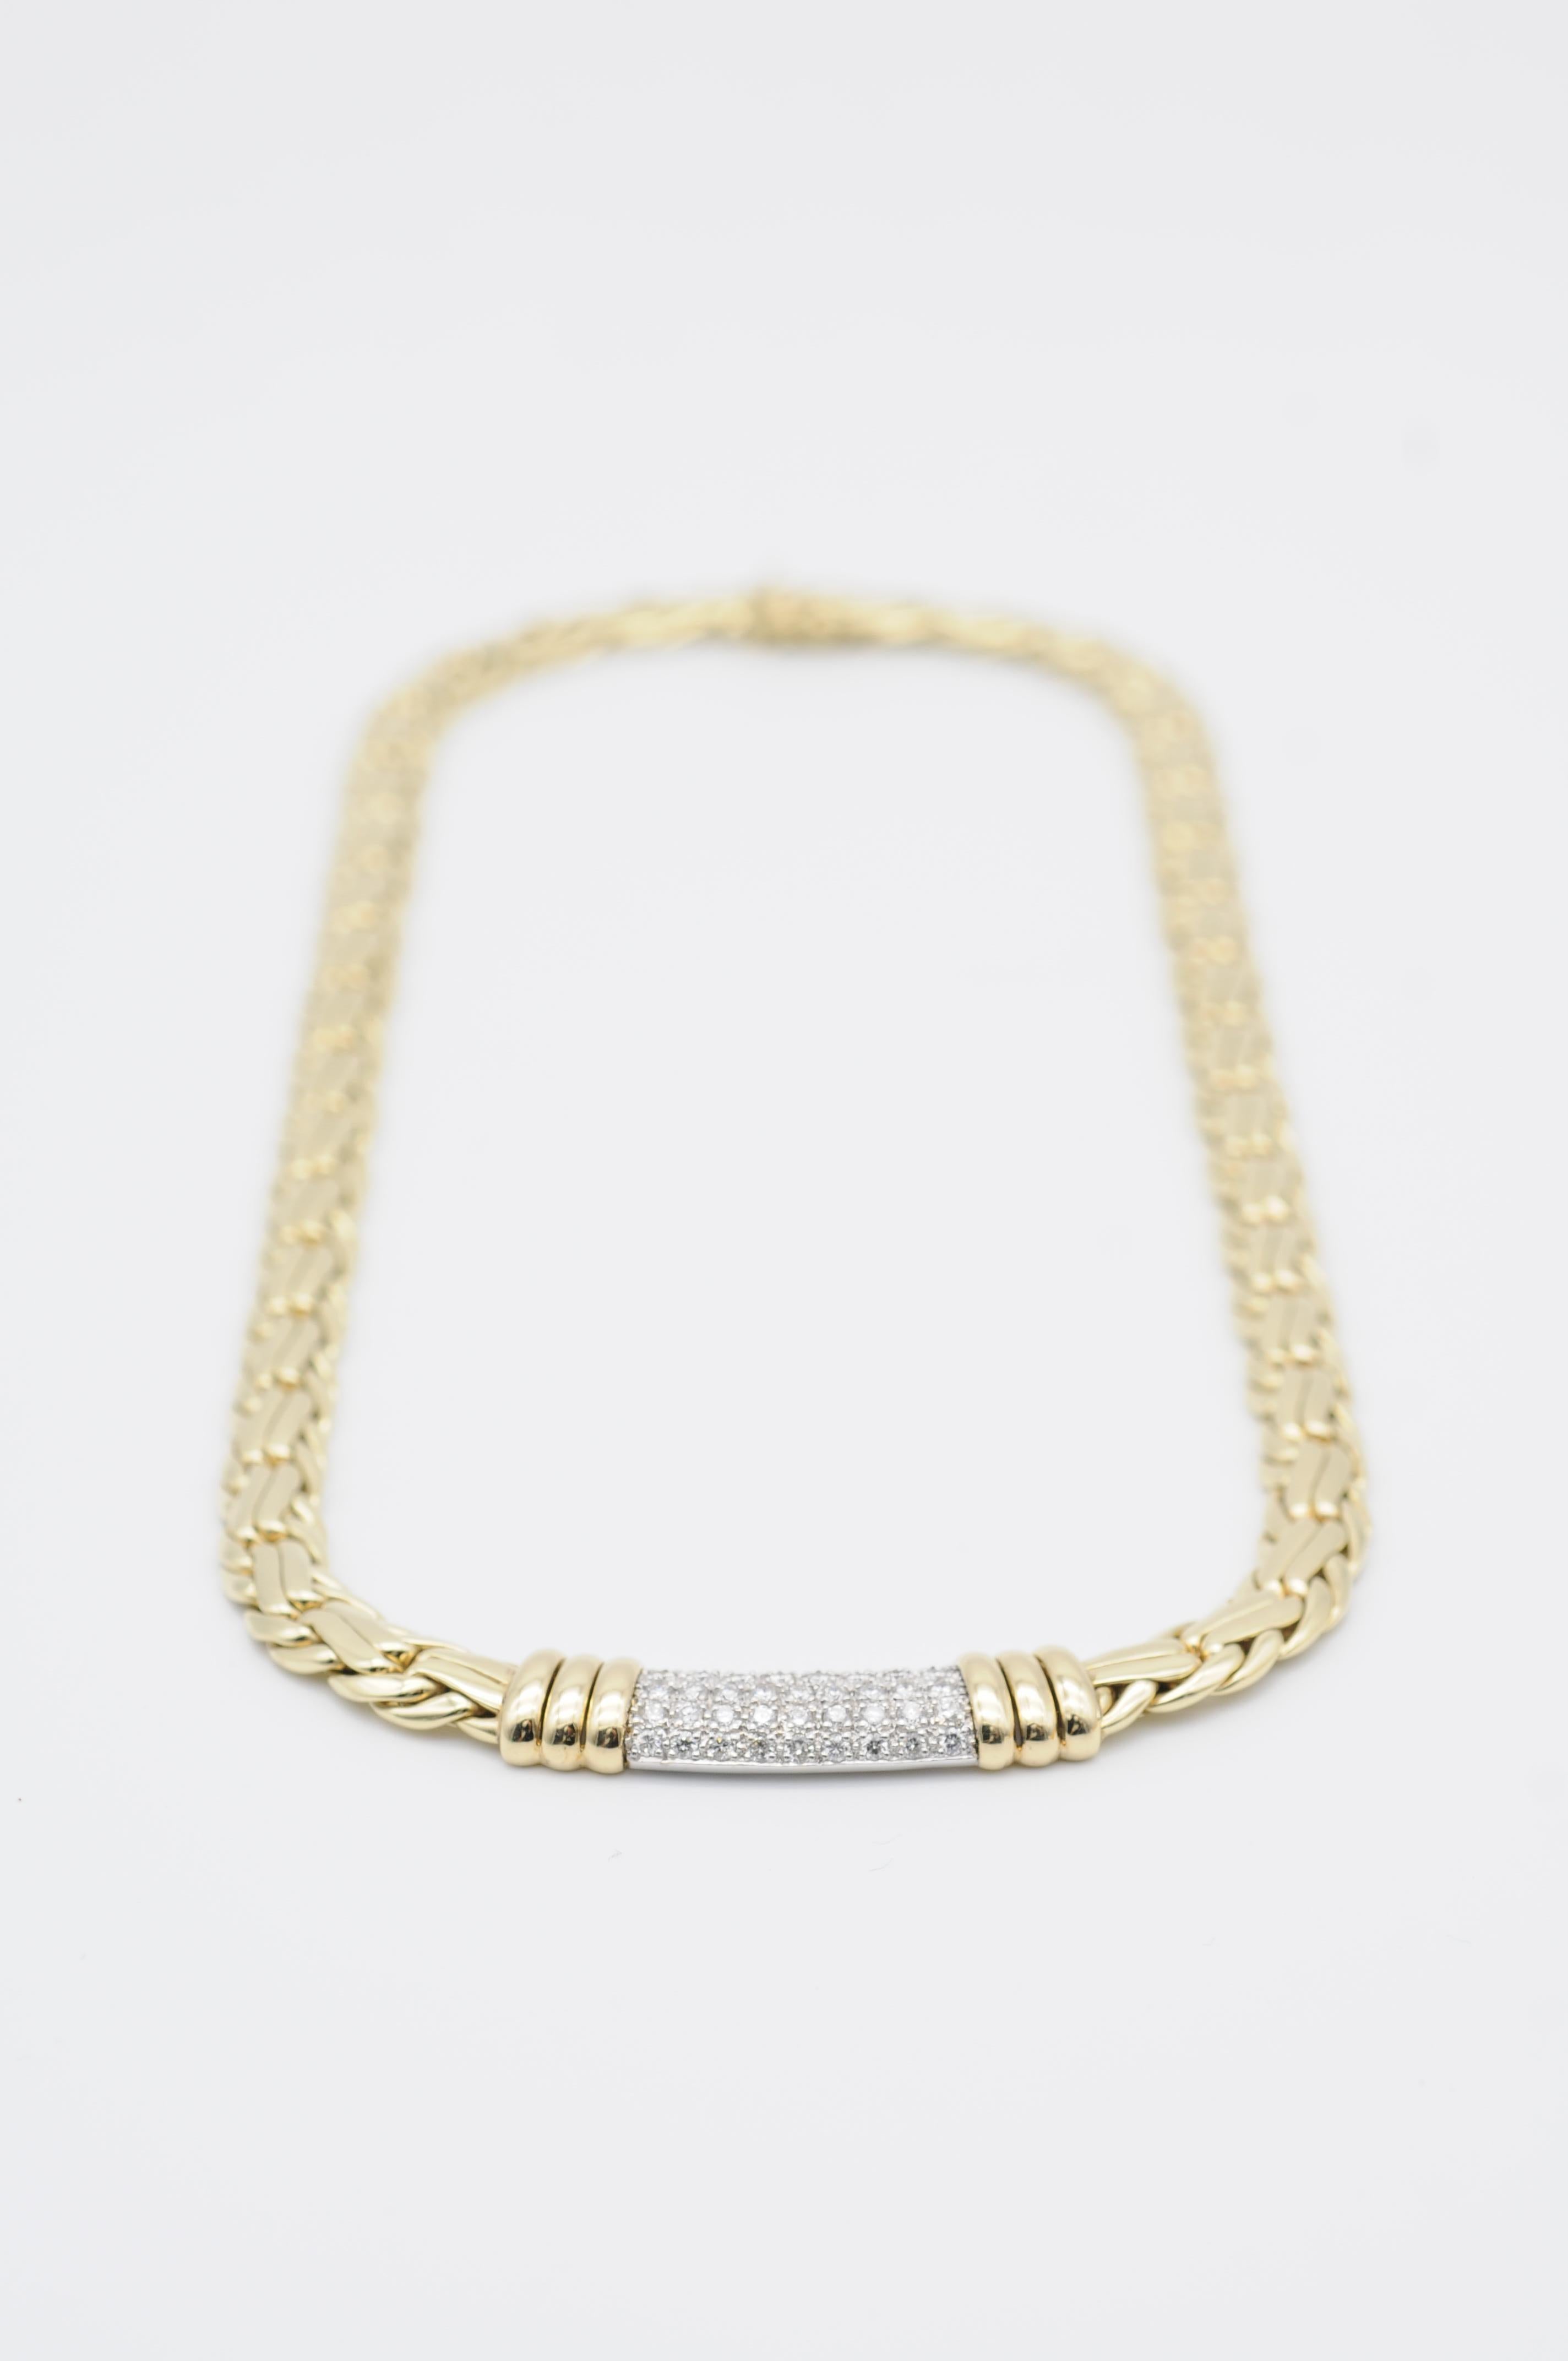 Introducing the Wide Brilliant Necklace in 14k Yellow Gold - a true masterpiece of beauty, luxury, and sophistication. Crafted with the finest attention to detail, this necklace is made from the highest quality 14k yellow gold, ensuring both